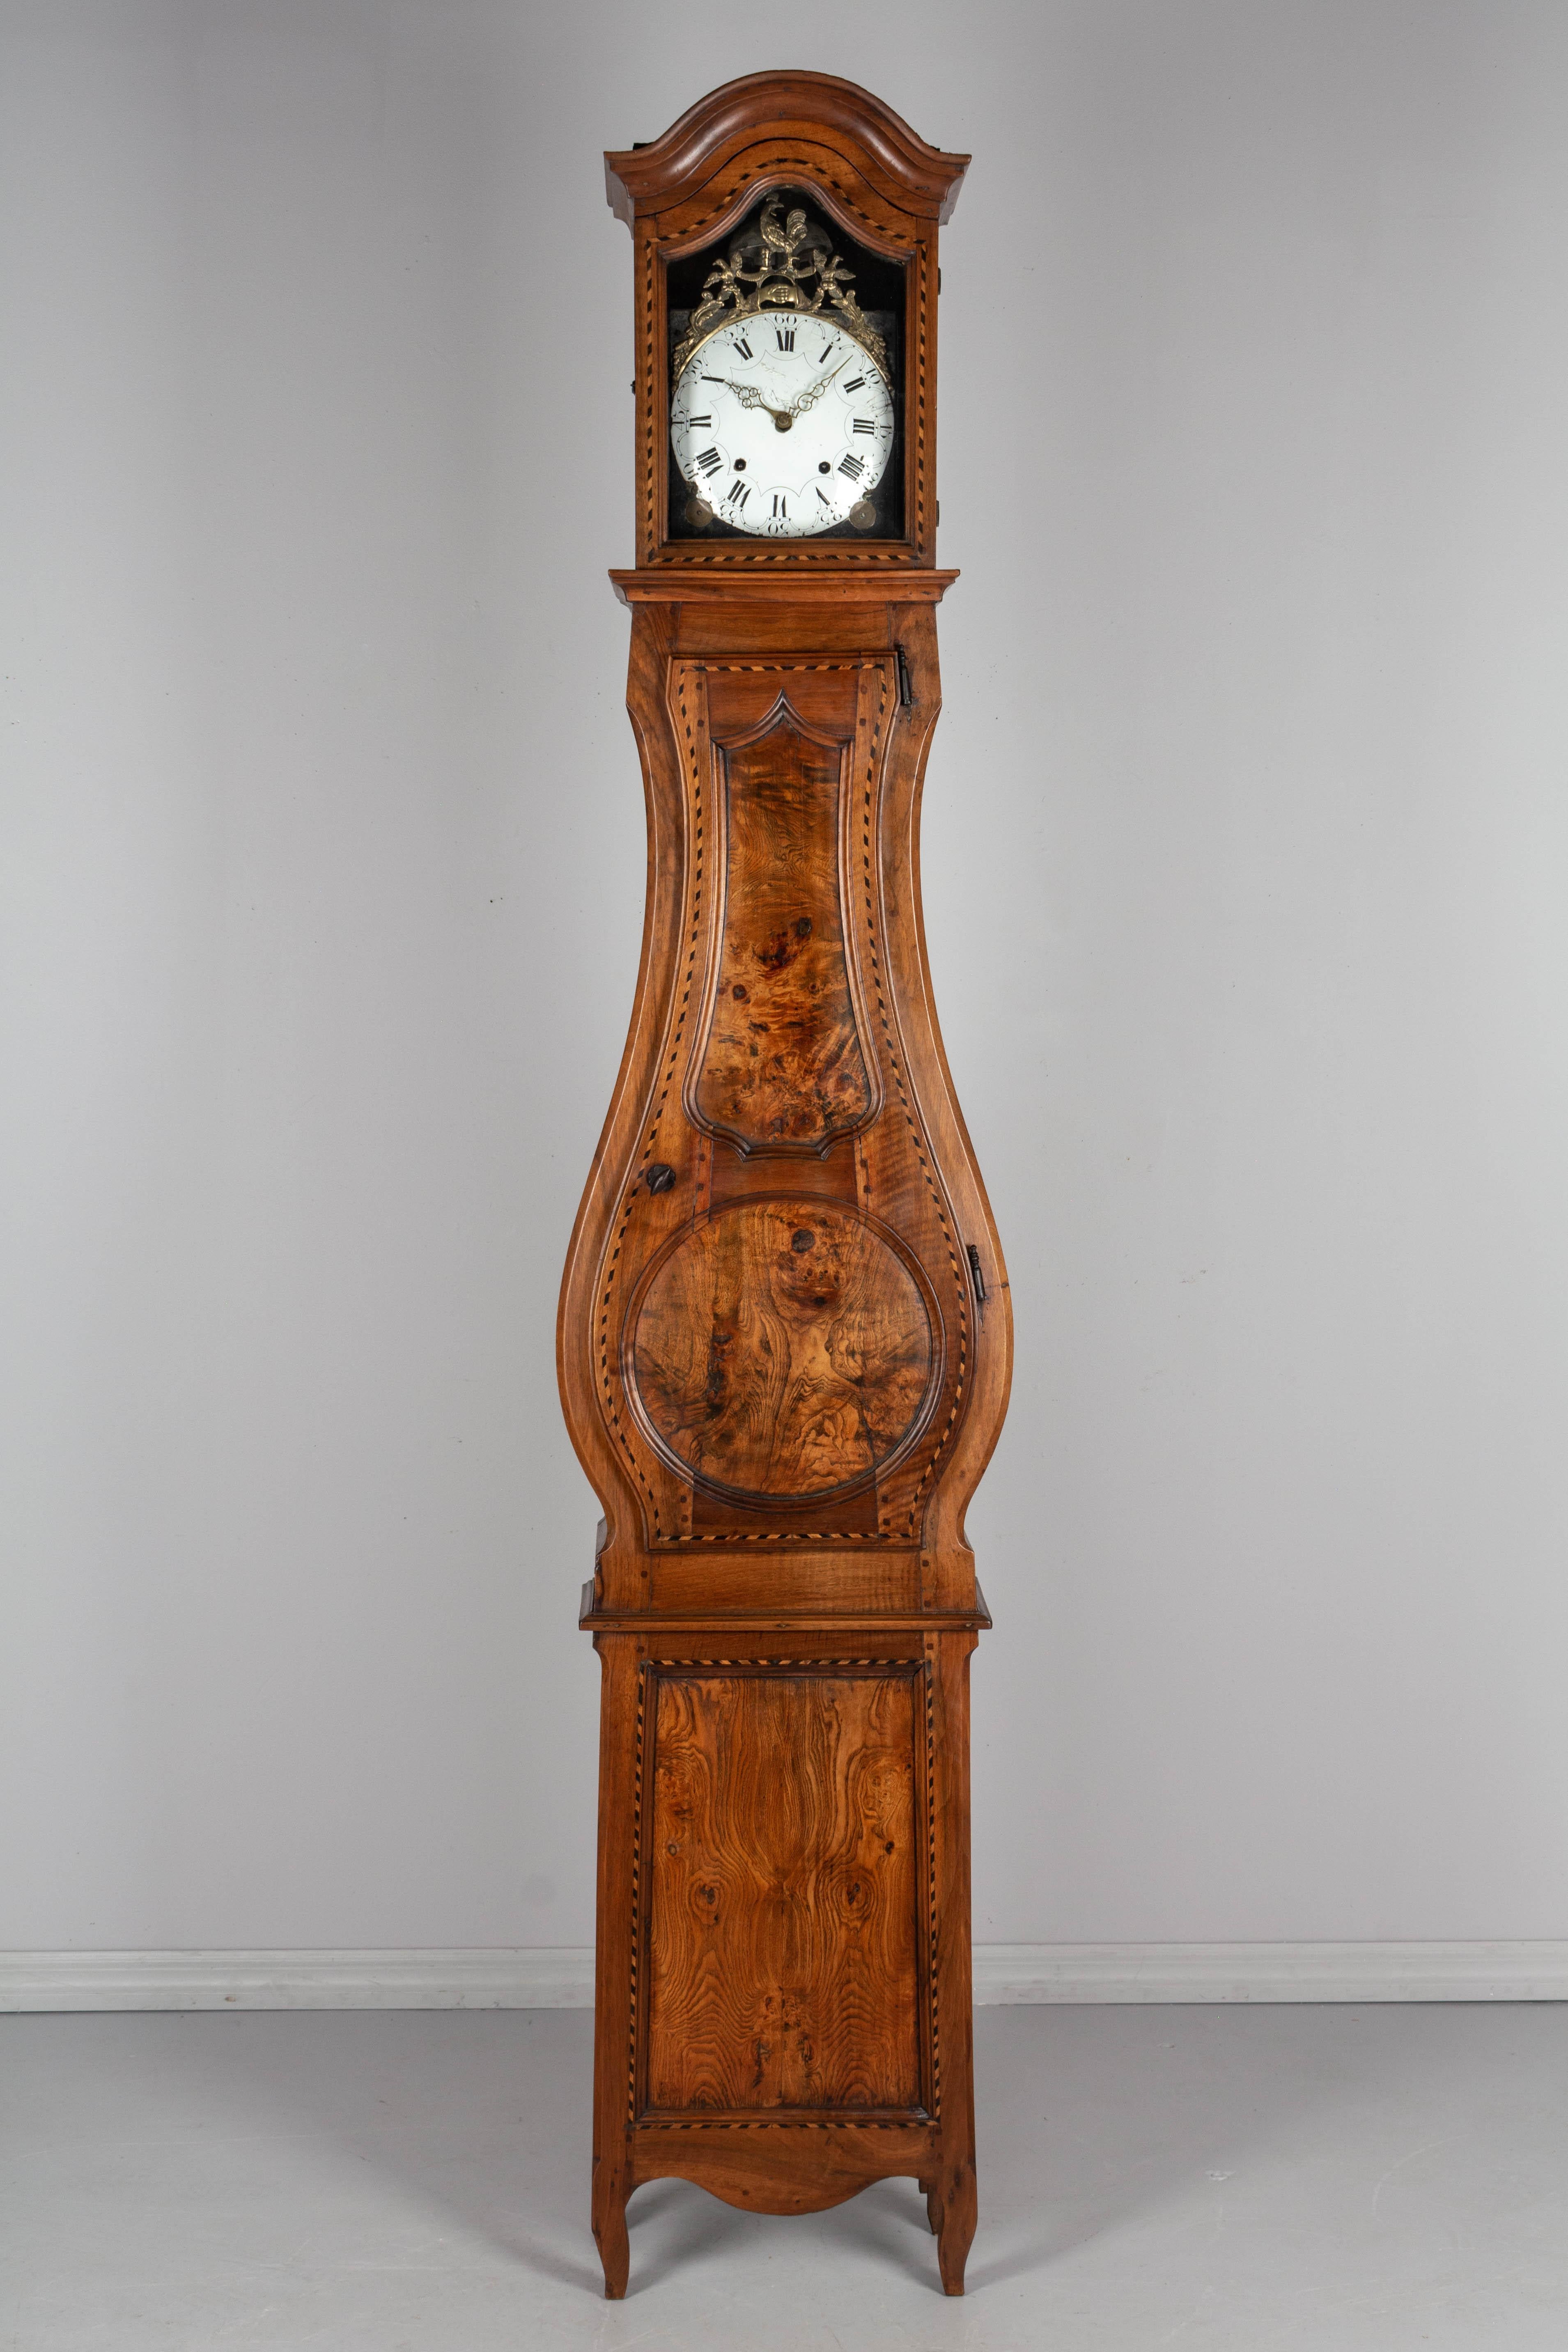 An exceptional 18th century French Horloge De Parquet, or tall case clock, from Pays de Bresse in Burgundy. The case is made of solid walnut with bookmatched wood at the base and a door with inset panels of beautiful burled elm. In two parts: the